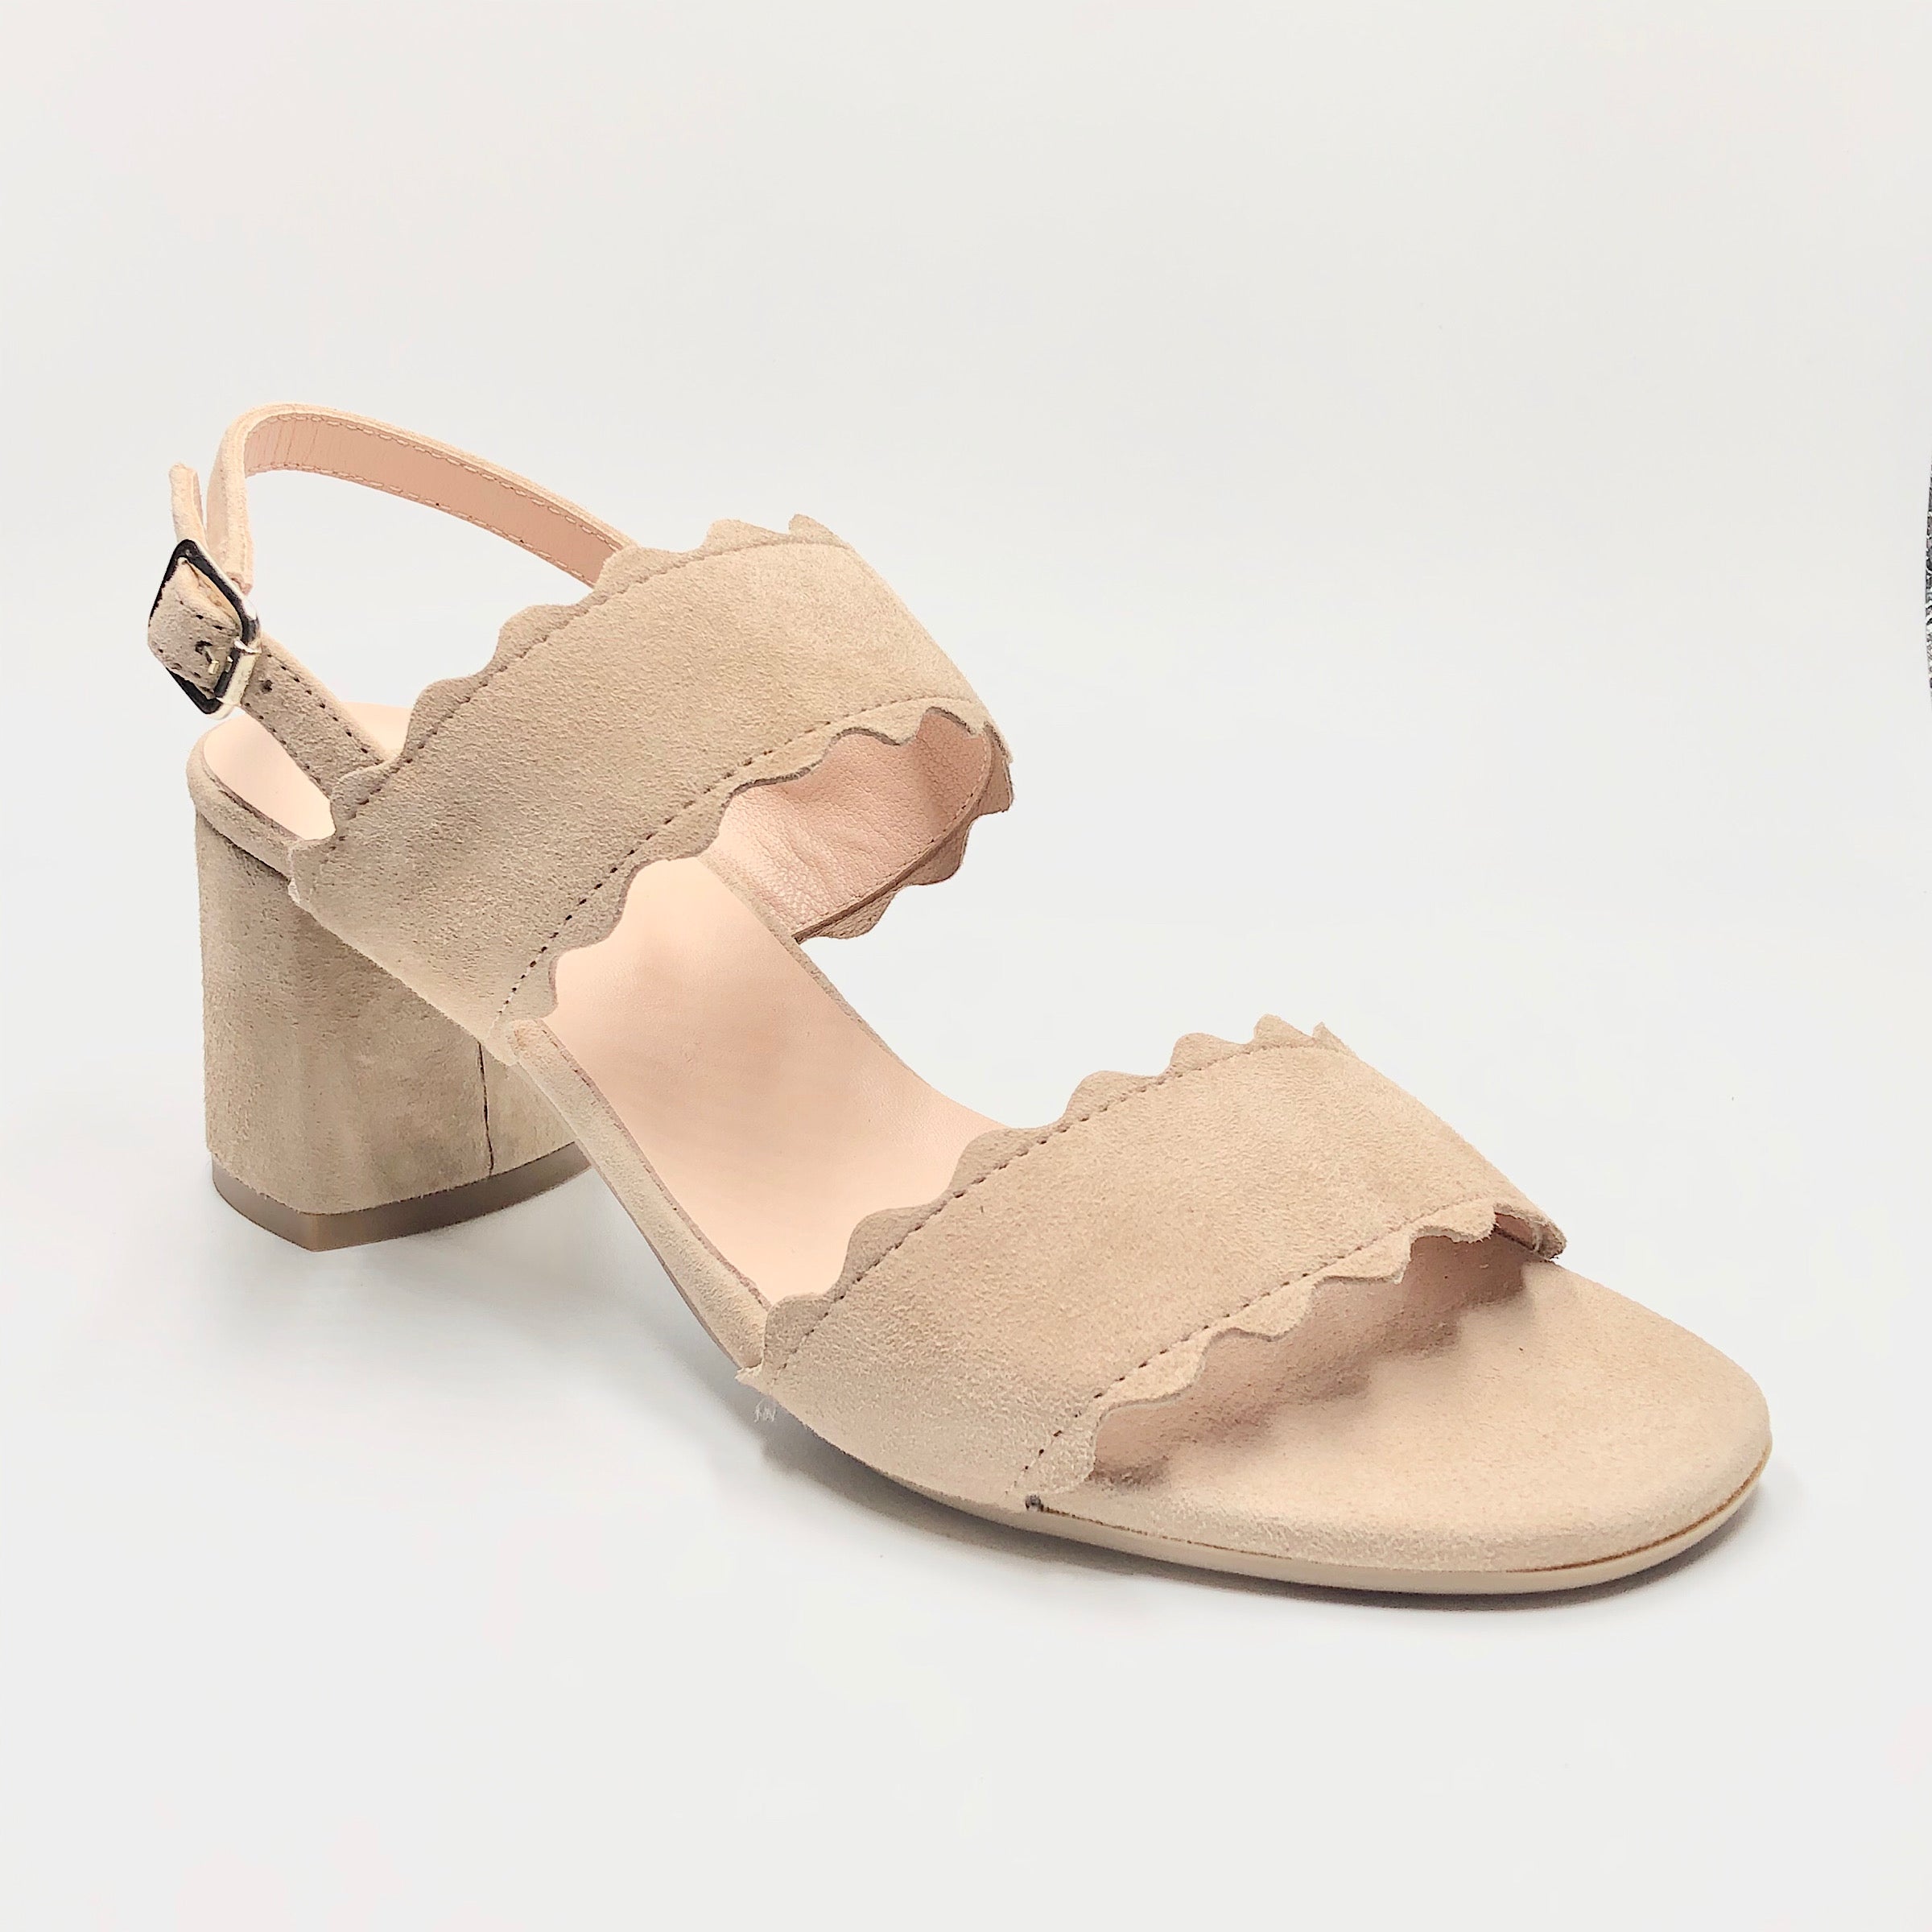 Scallop 2 - The Perfect Sandal in Nude